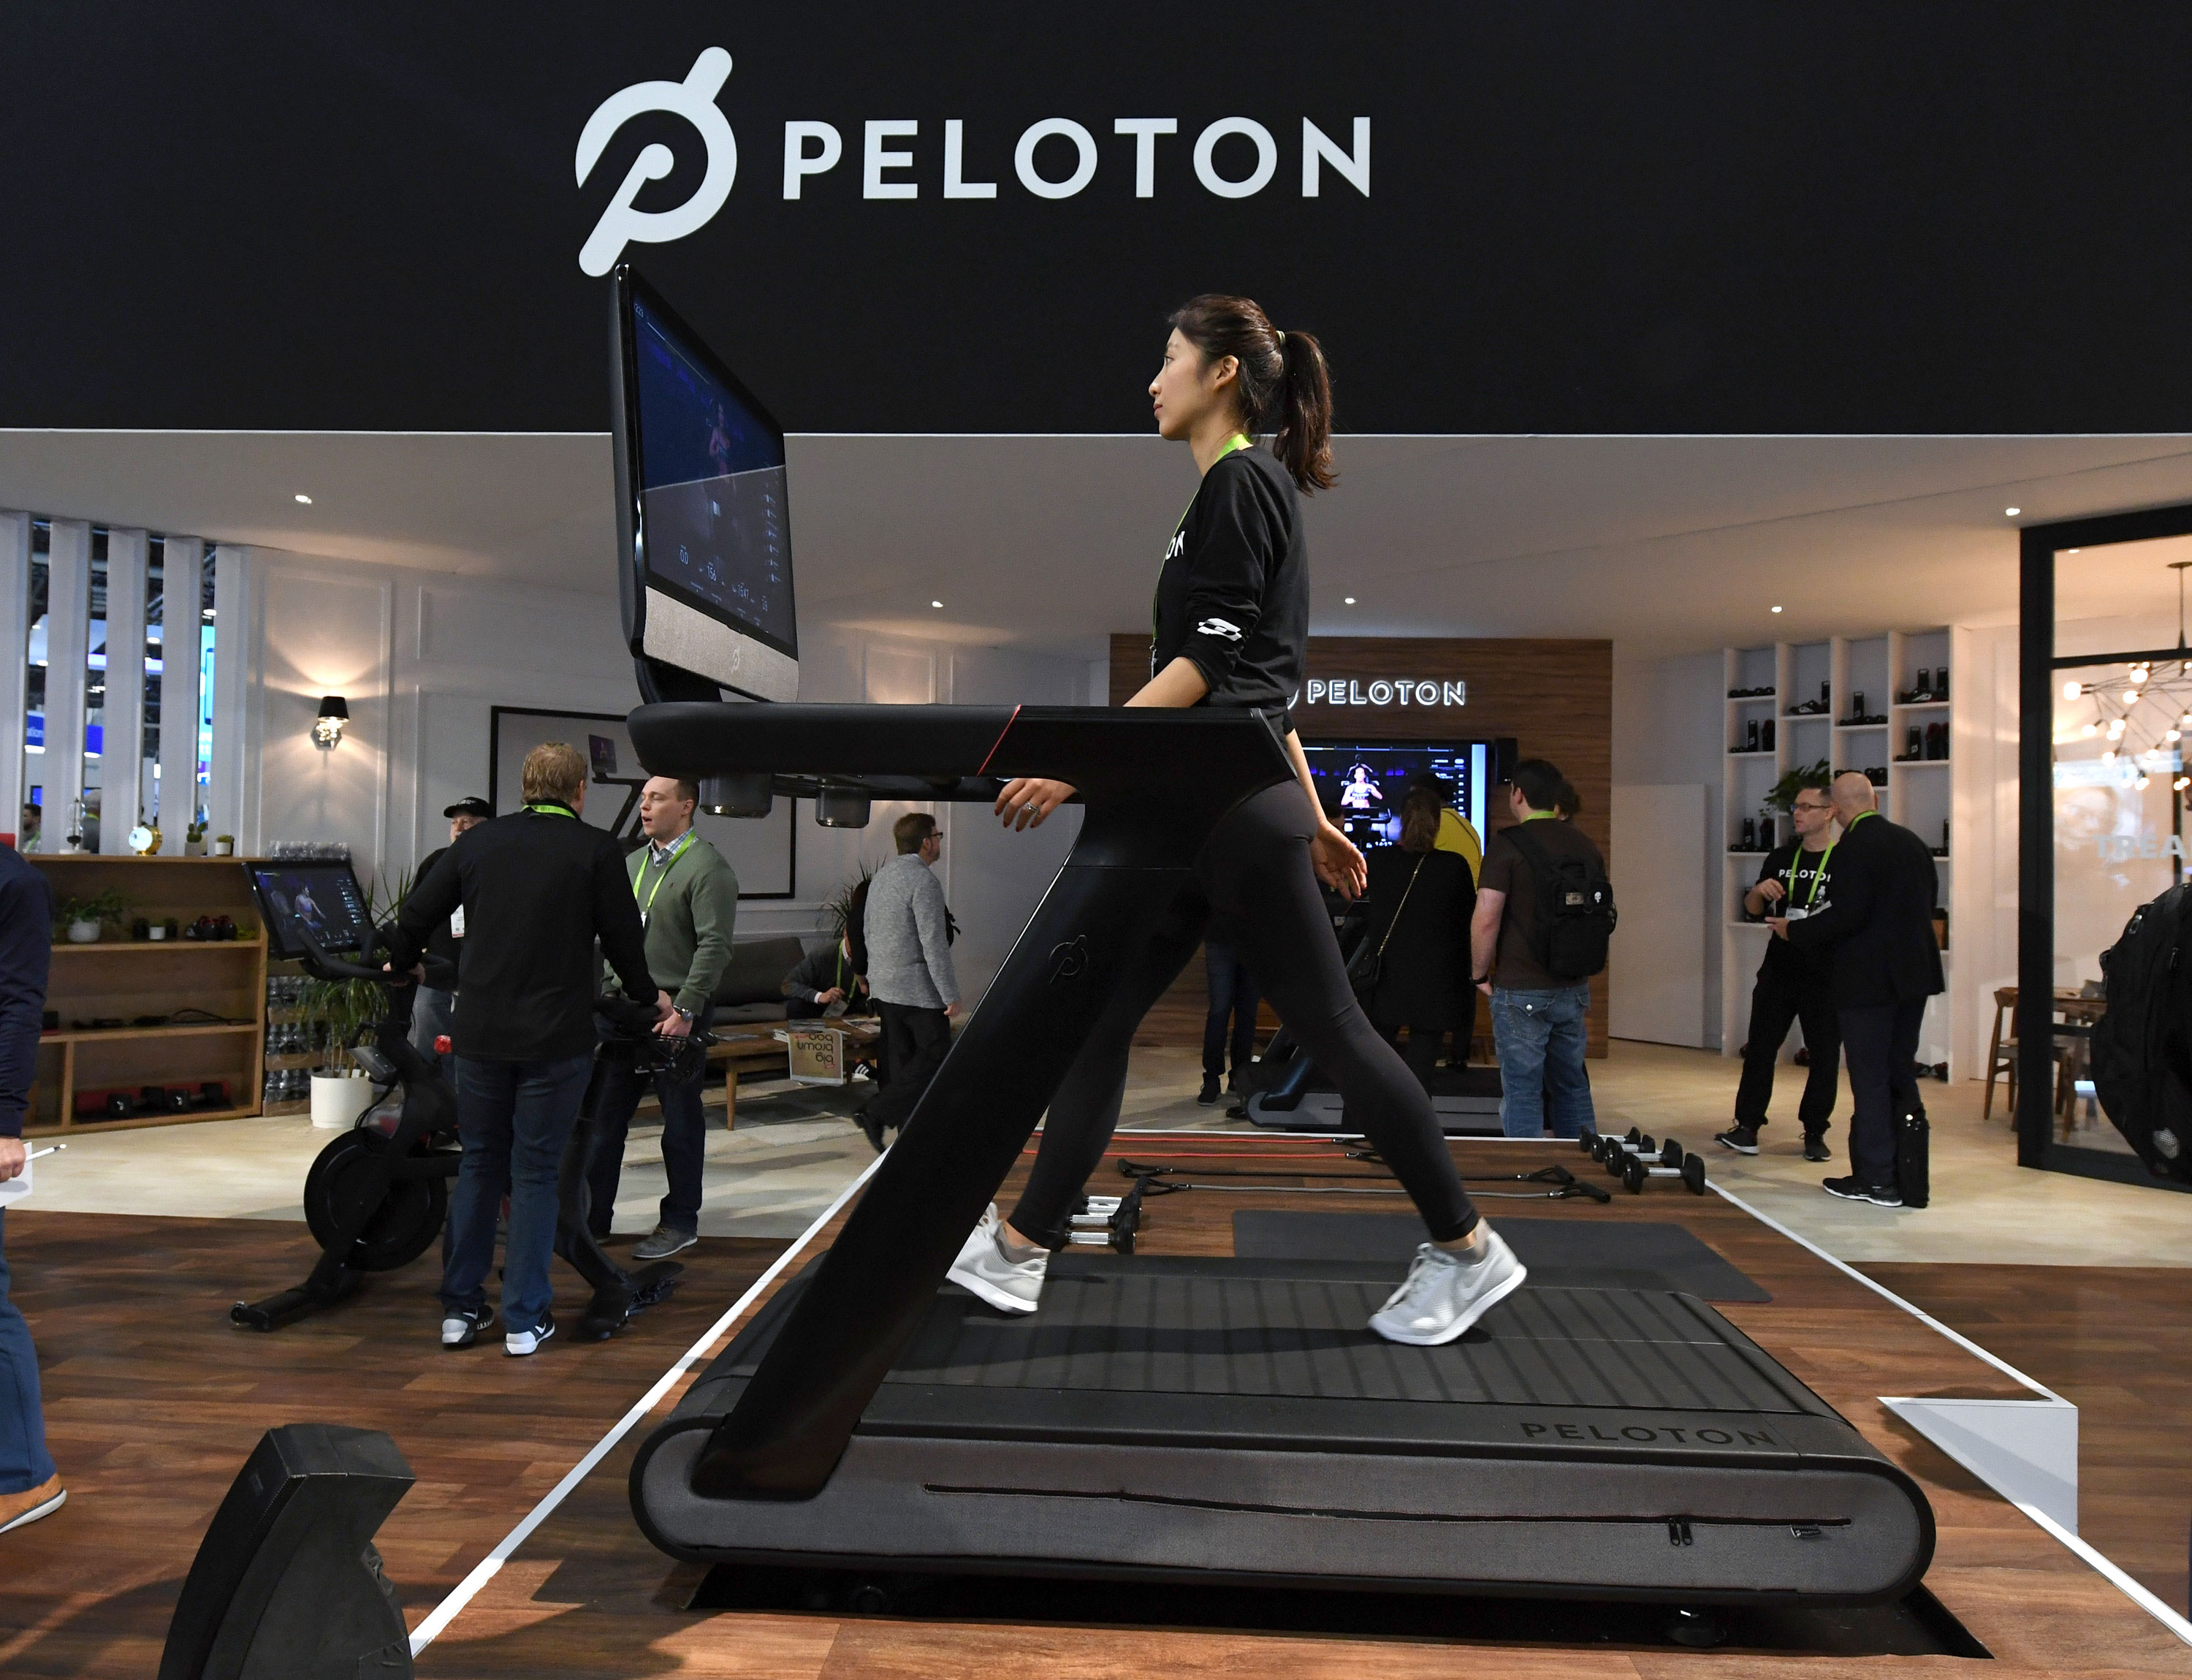 A Peloton treadmill is displayed at CES 2018 at the in Las Vegas.